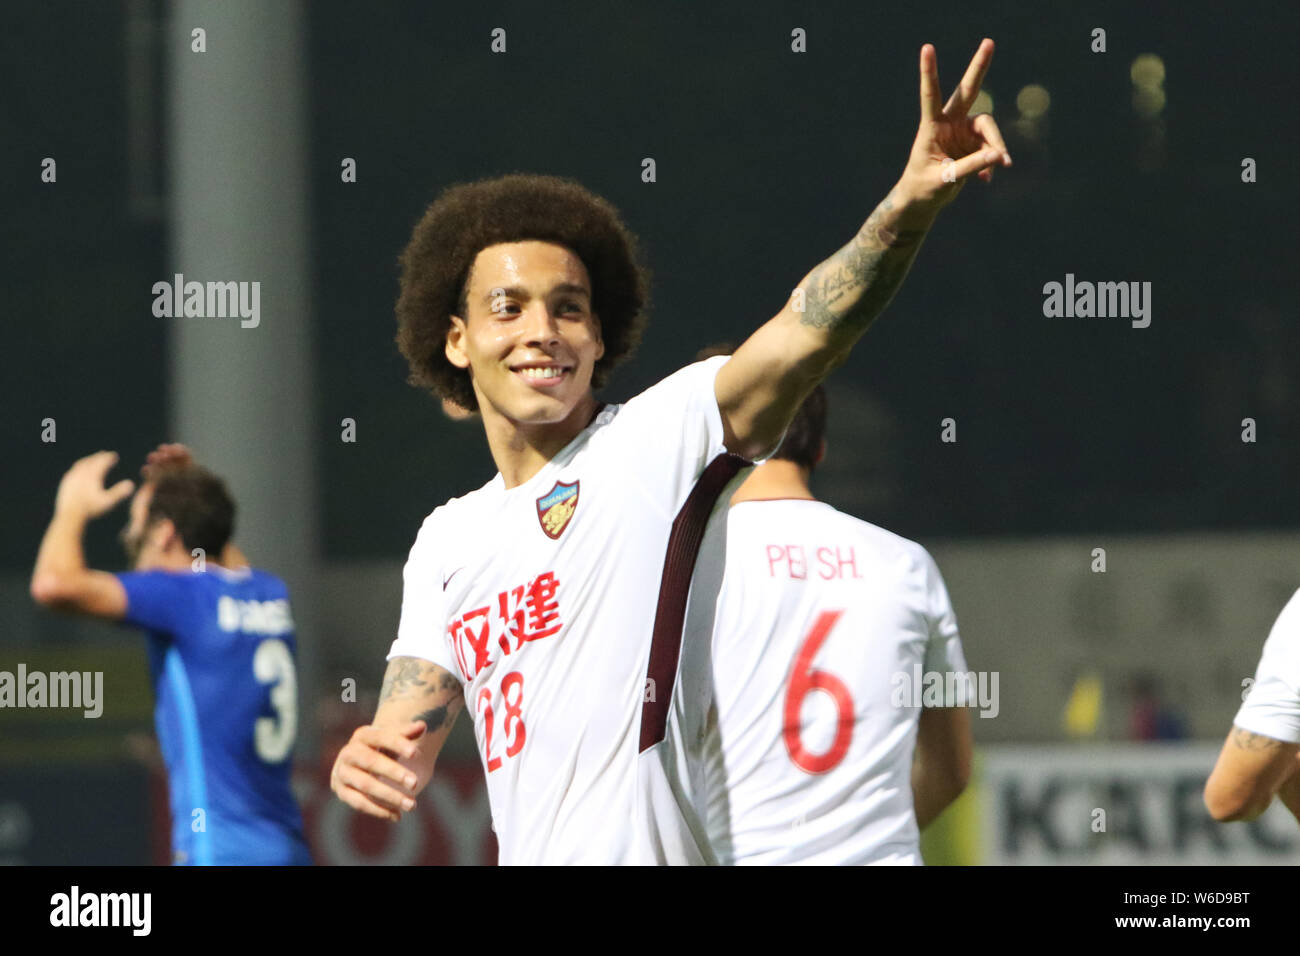 Belgian football player Axel Witsel of China's Tianjin Quanjian FC poses to celebrate after defeating Hong Kong's Kitchee SC in a Group E match during Stock Photo